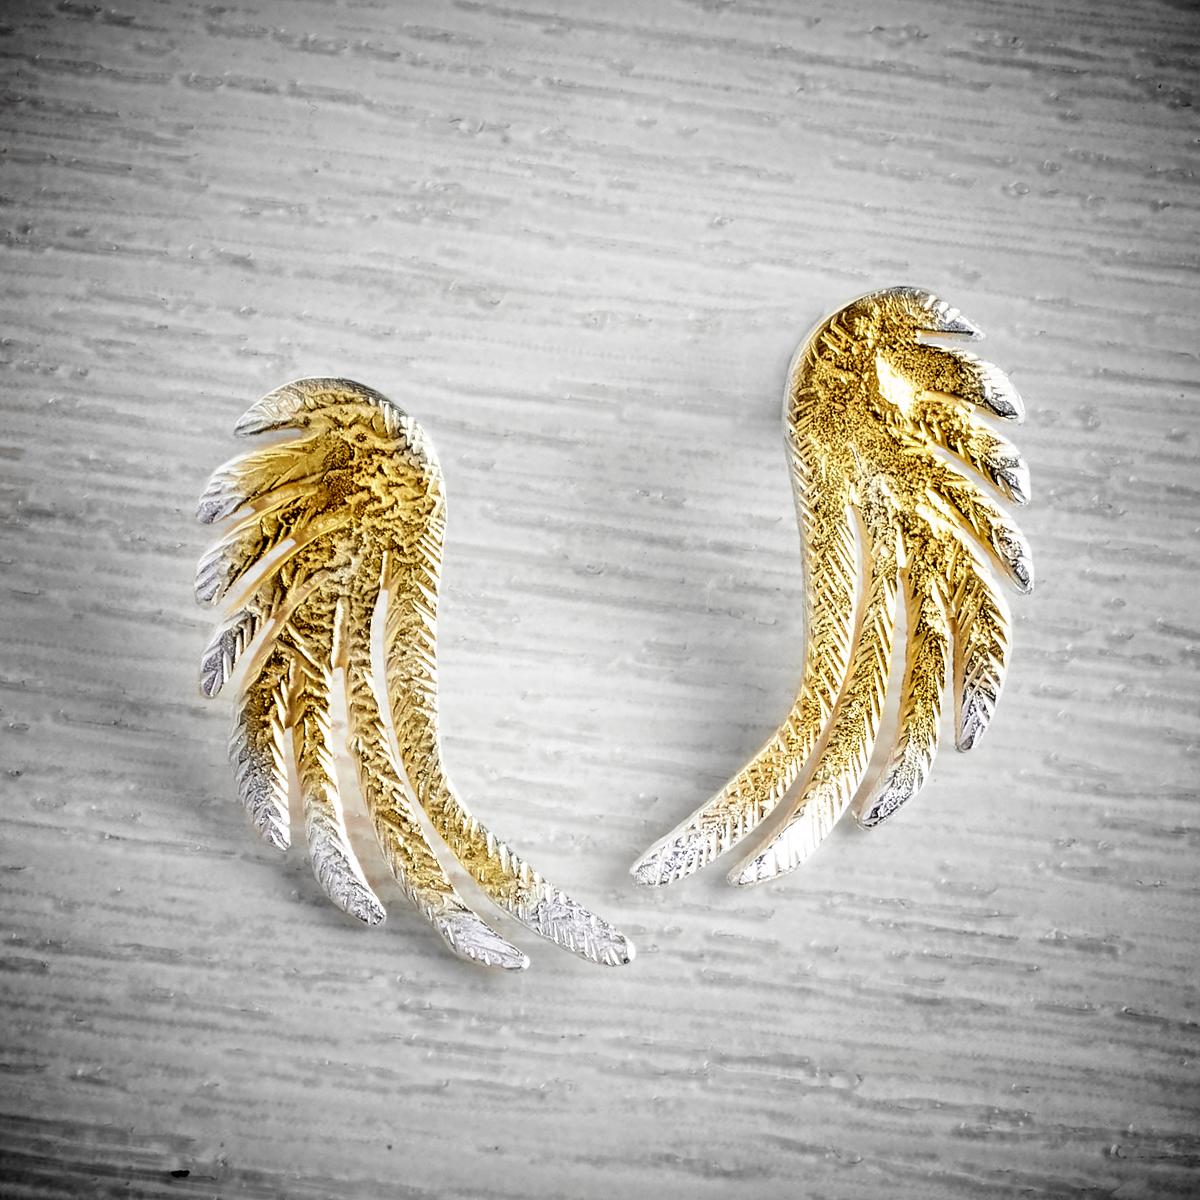 large silver and gold stud angel wing earrings by Fi Mehra available at THE JEWELLERY MAKERS, image property of EMMA WHITE-0